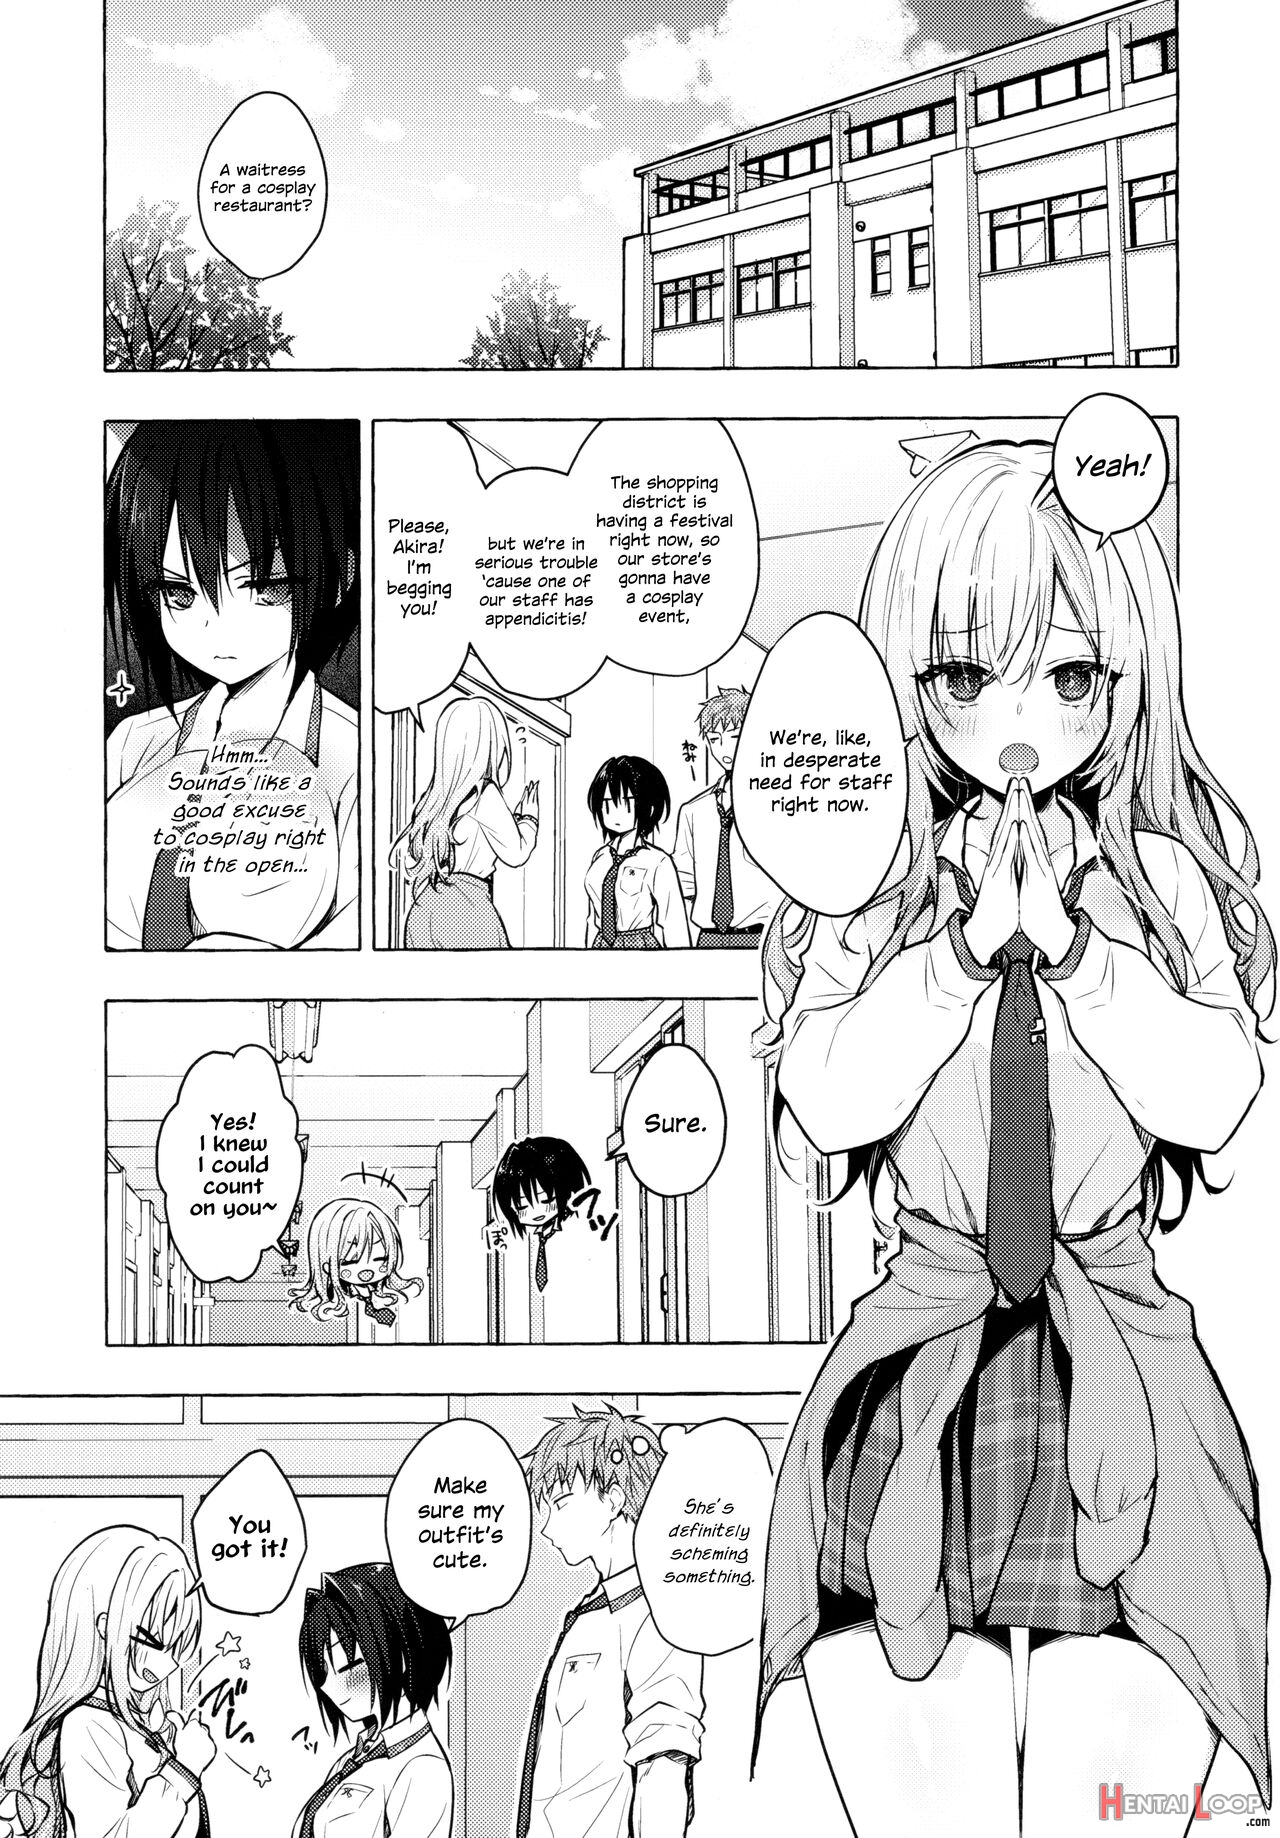 Akira-kun's Gender Swapped Sex Life 6 page 4